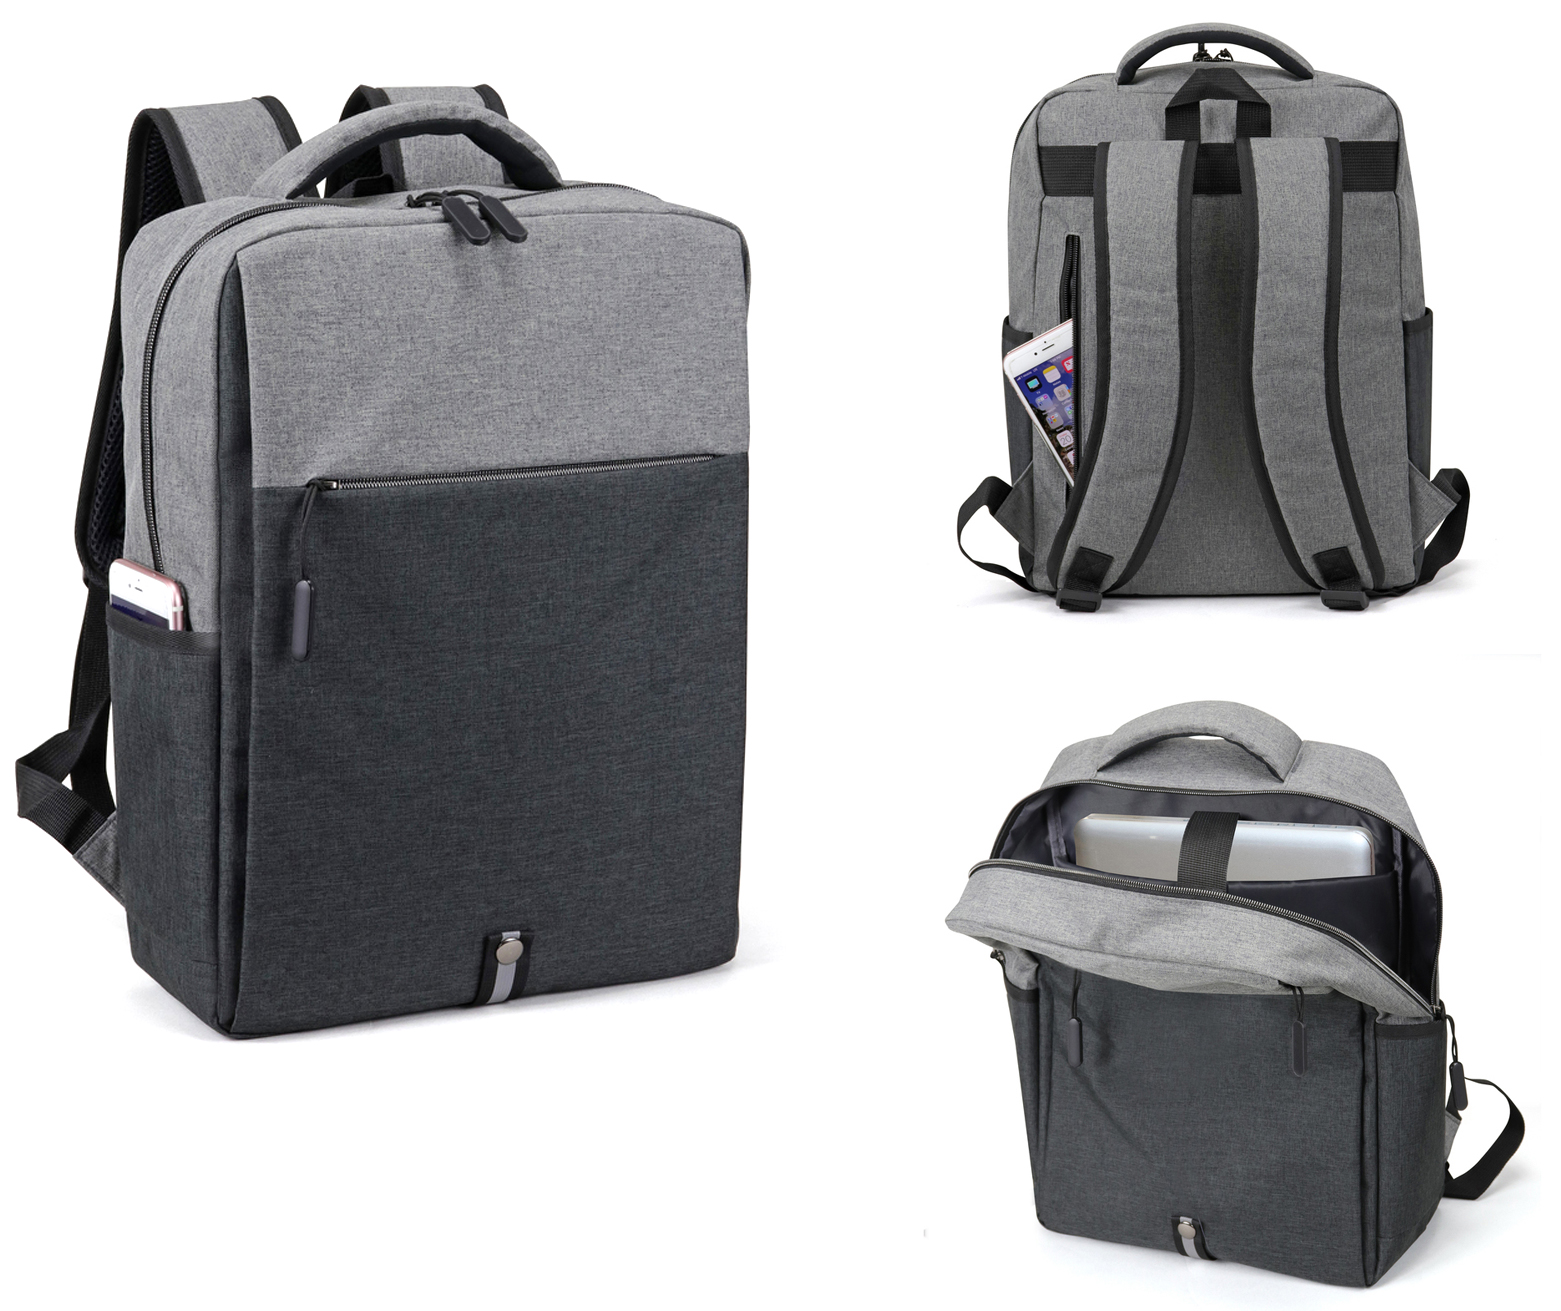 ''15'''' Two Tone Deluxe Computer BACKPACKs w/ Tablet Storage''